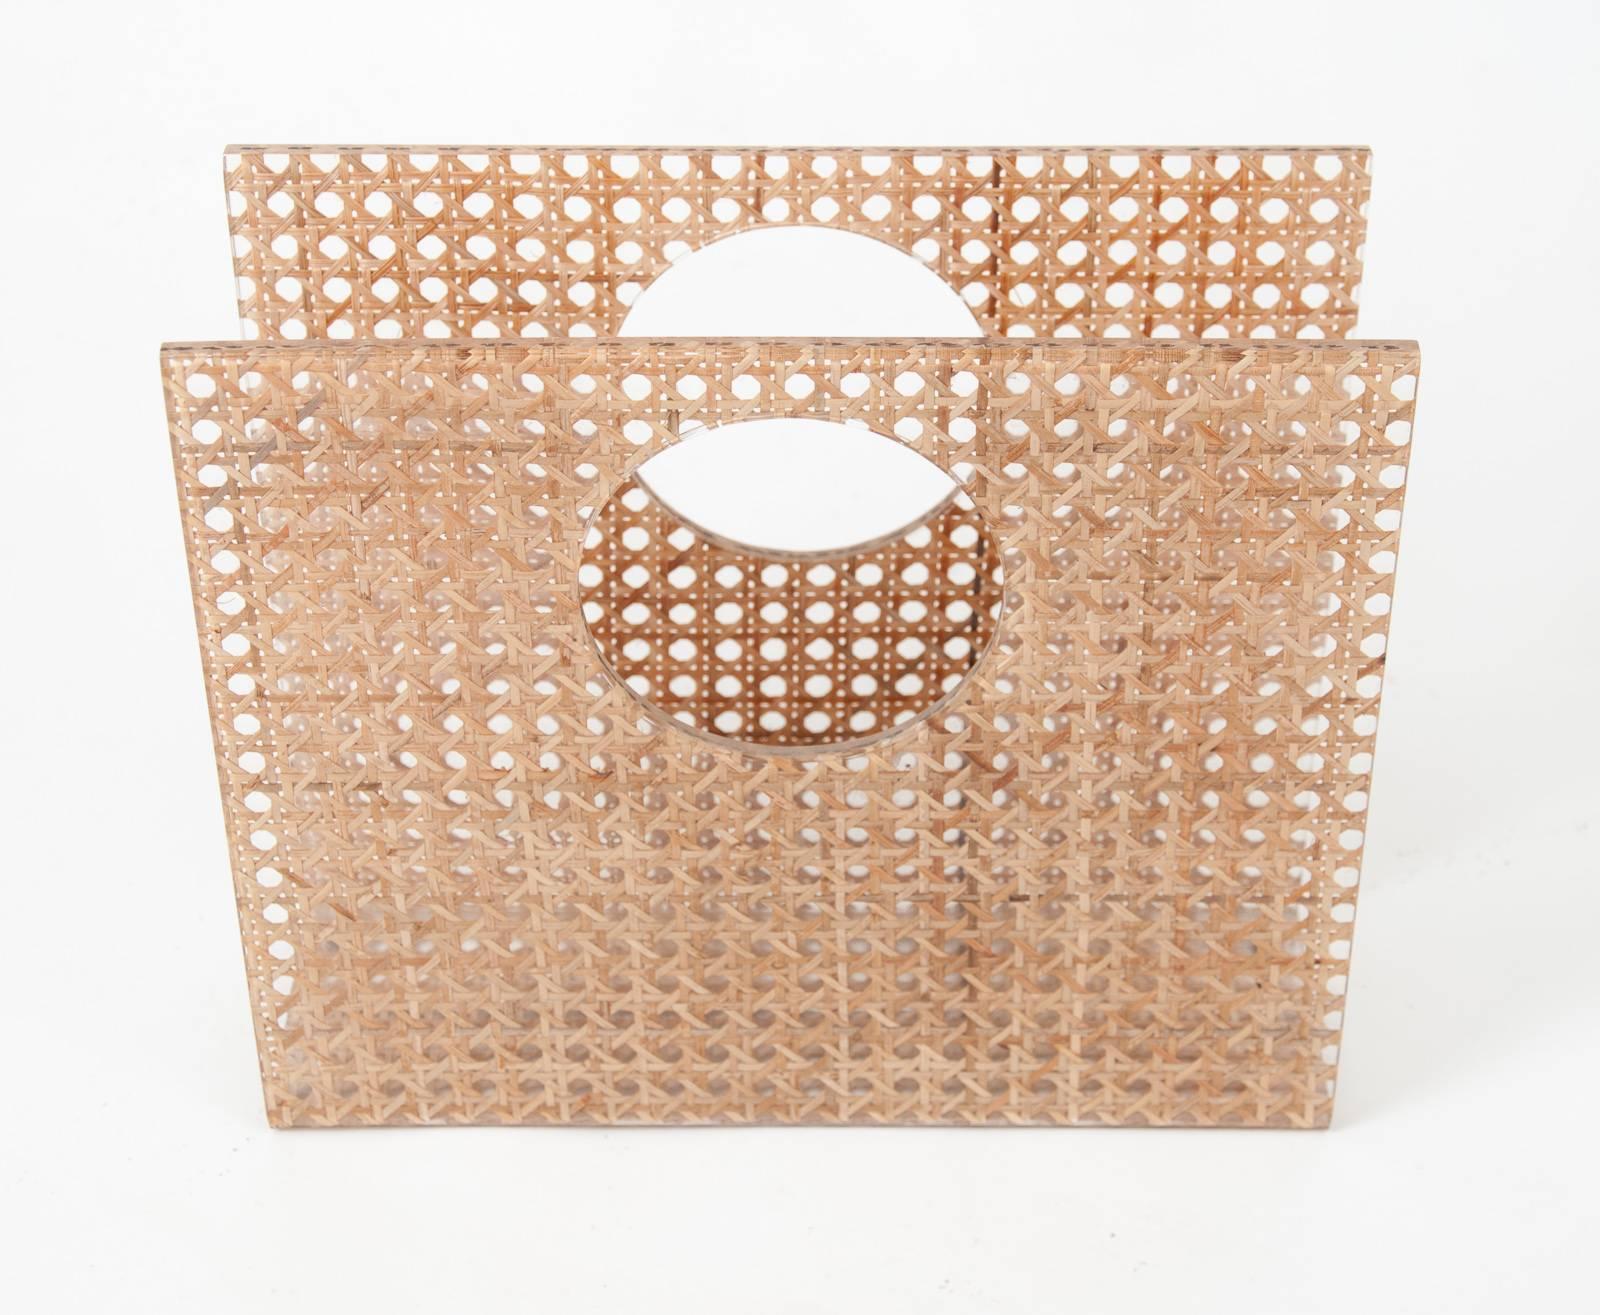 Christian Dior Home Attributed Lucite and Cane Magazine Holder 1